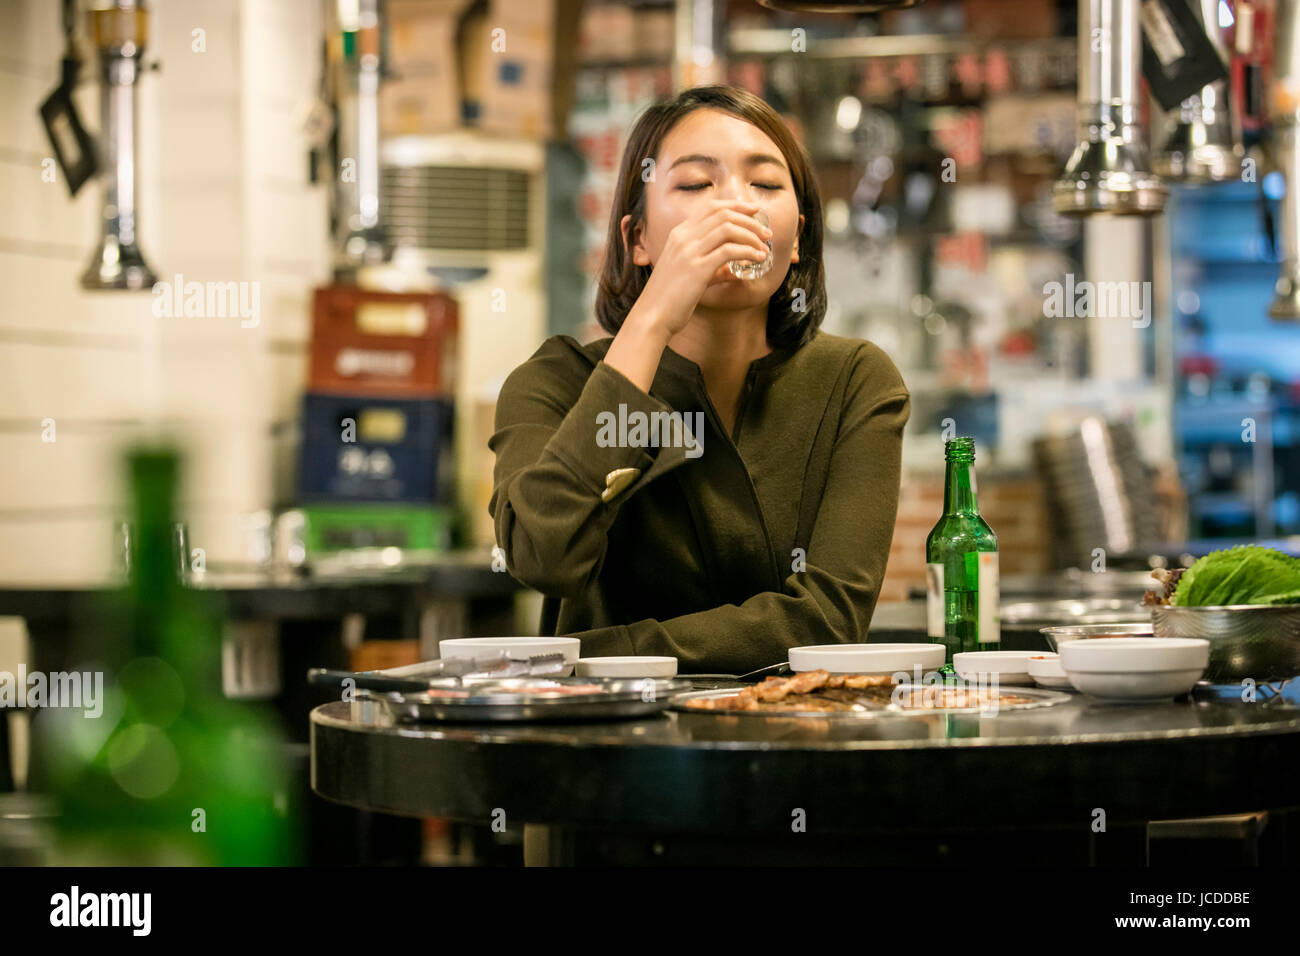 Portrait of single woman drinking alone at restaurant Stock Photo